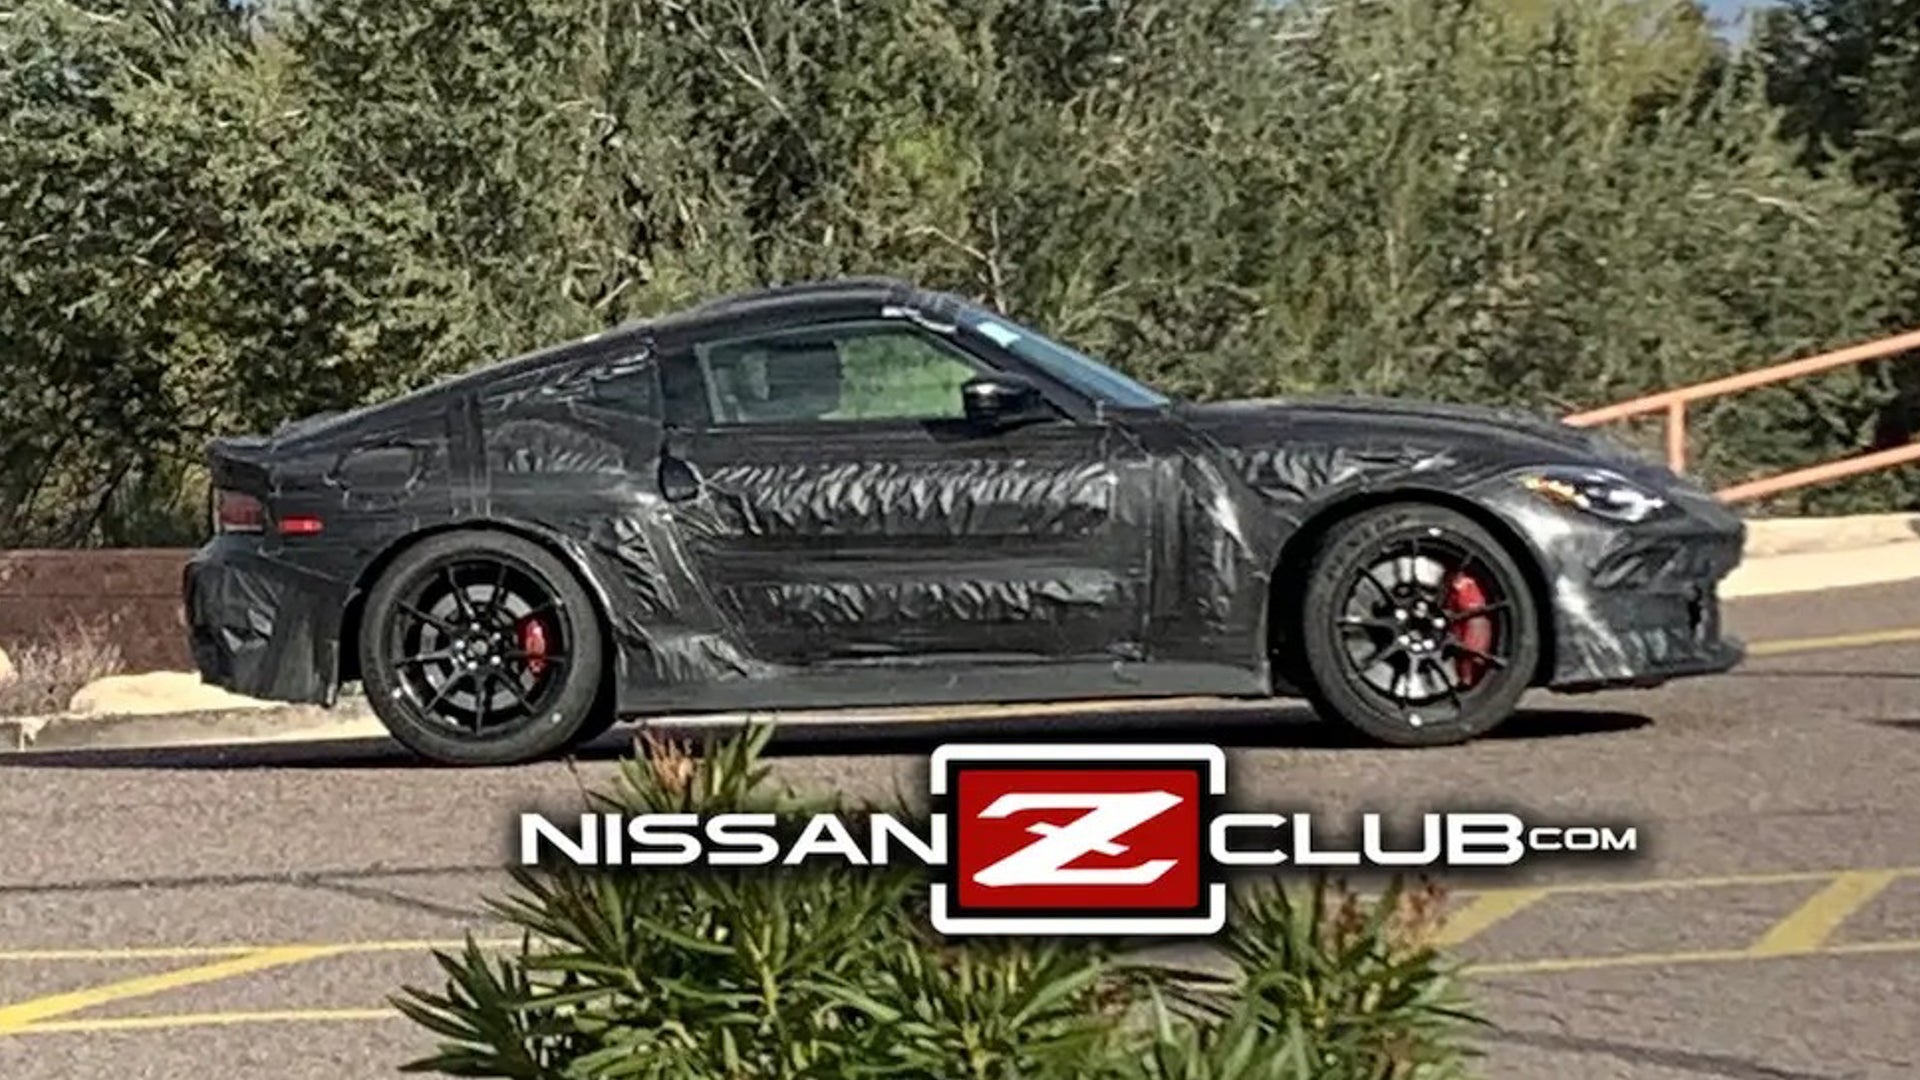 Upcoming Nissan Z Nismo Could Boast 414 HP, Aero From GT4 Racer